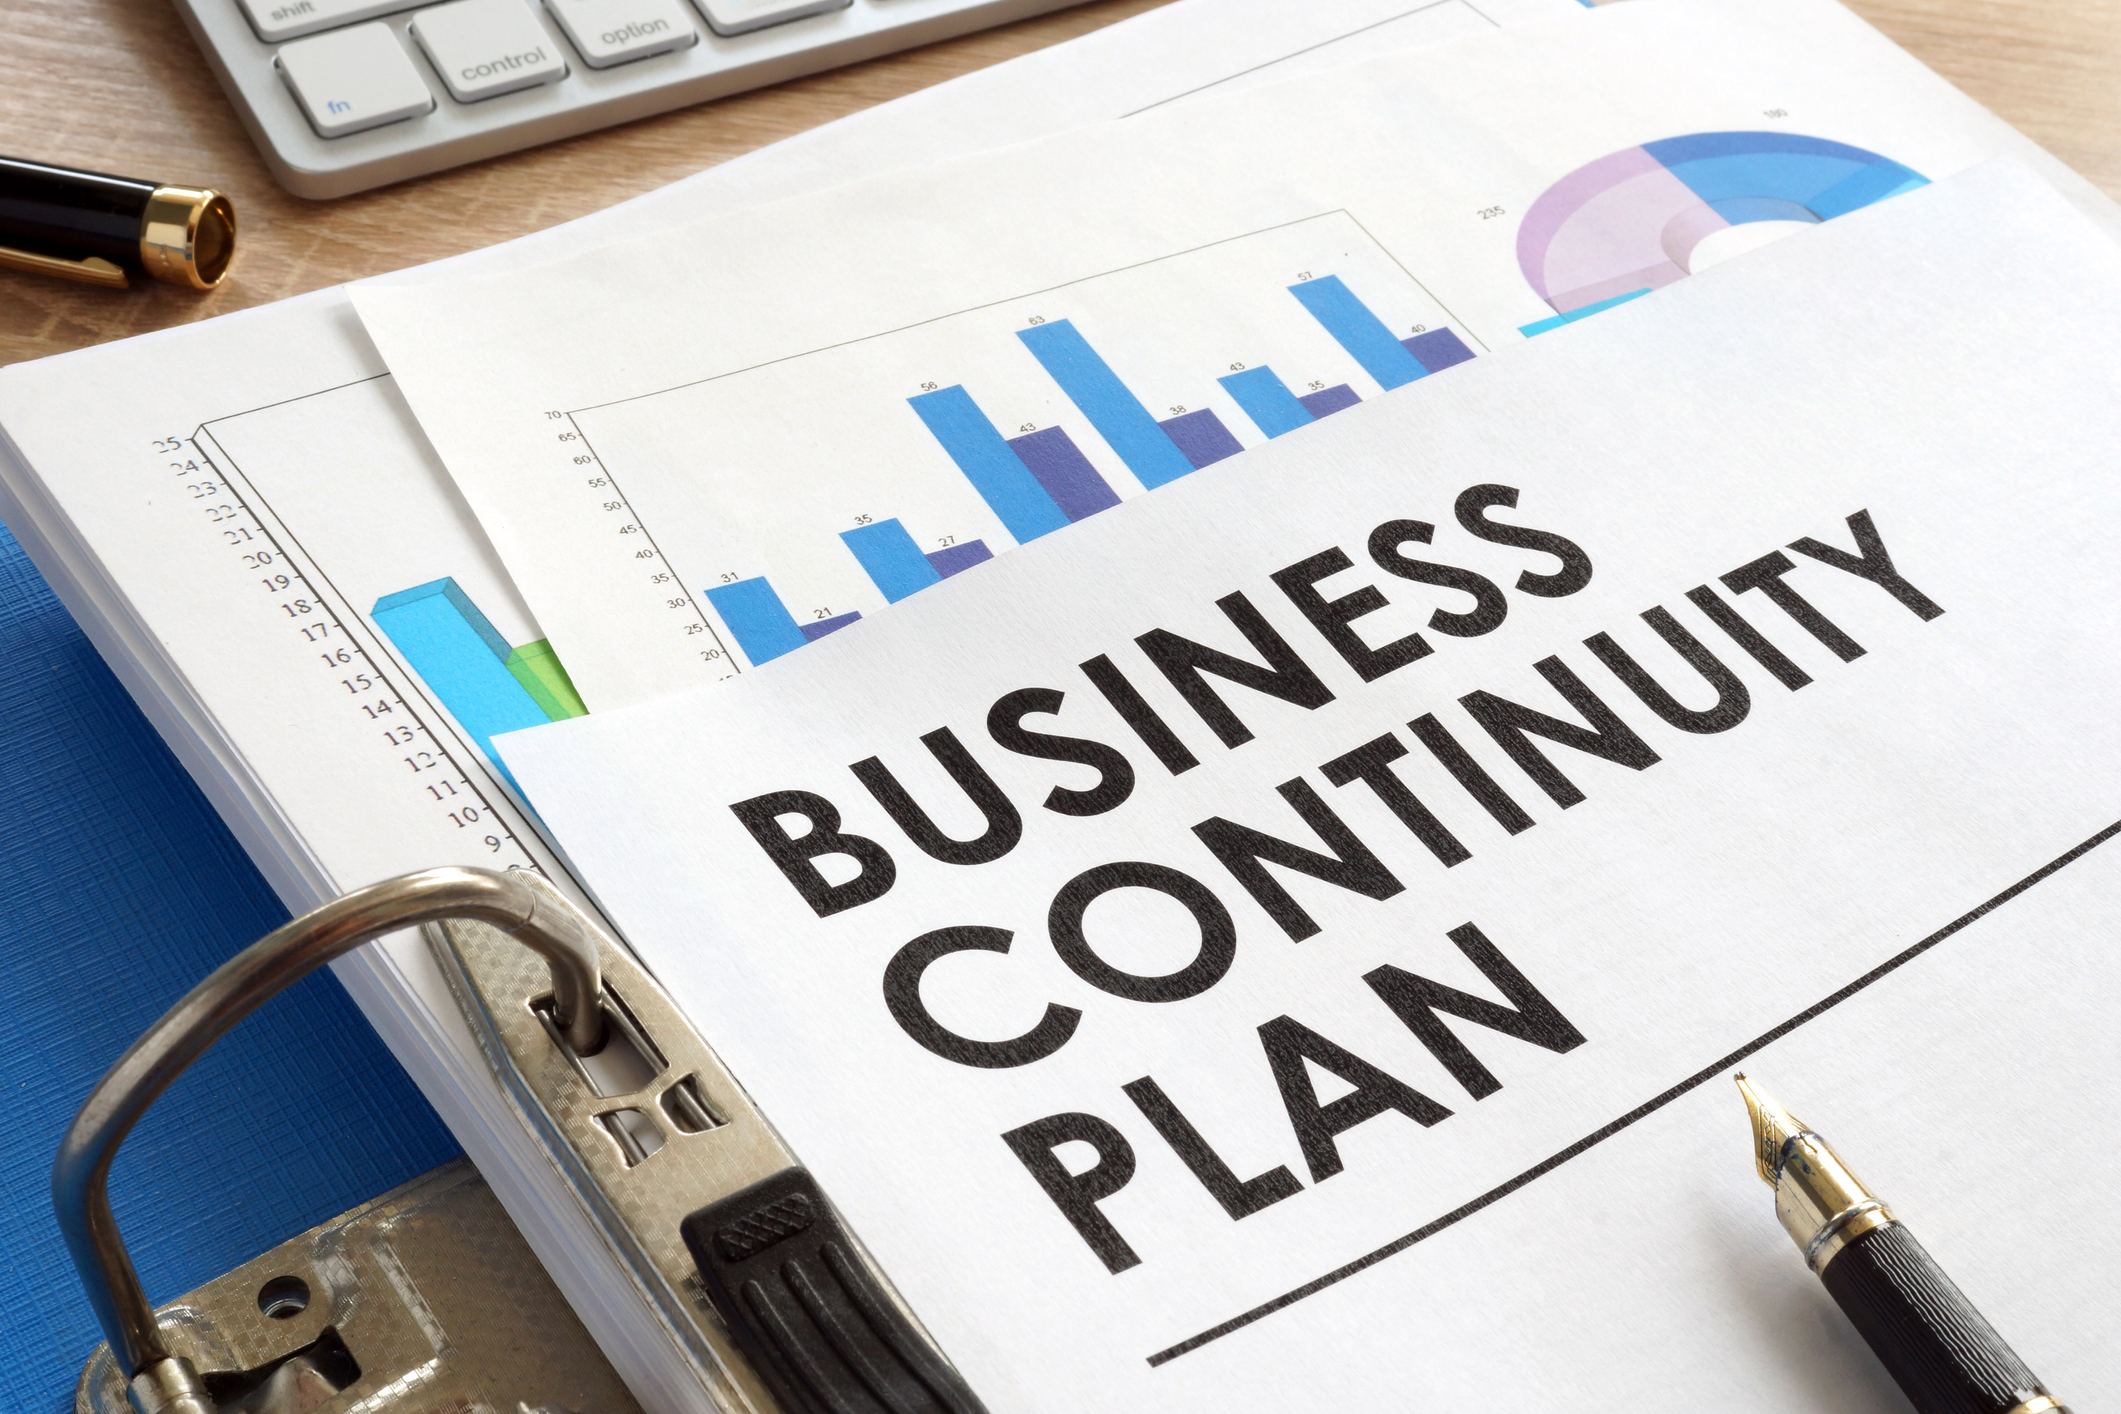 a business continuity plan helps organizations to operate at what level